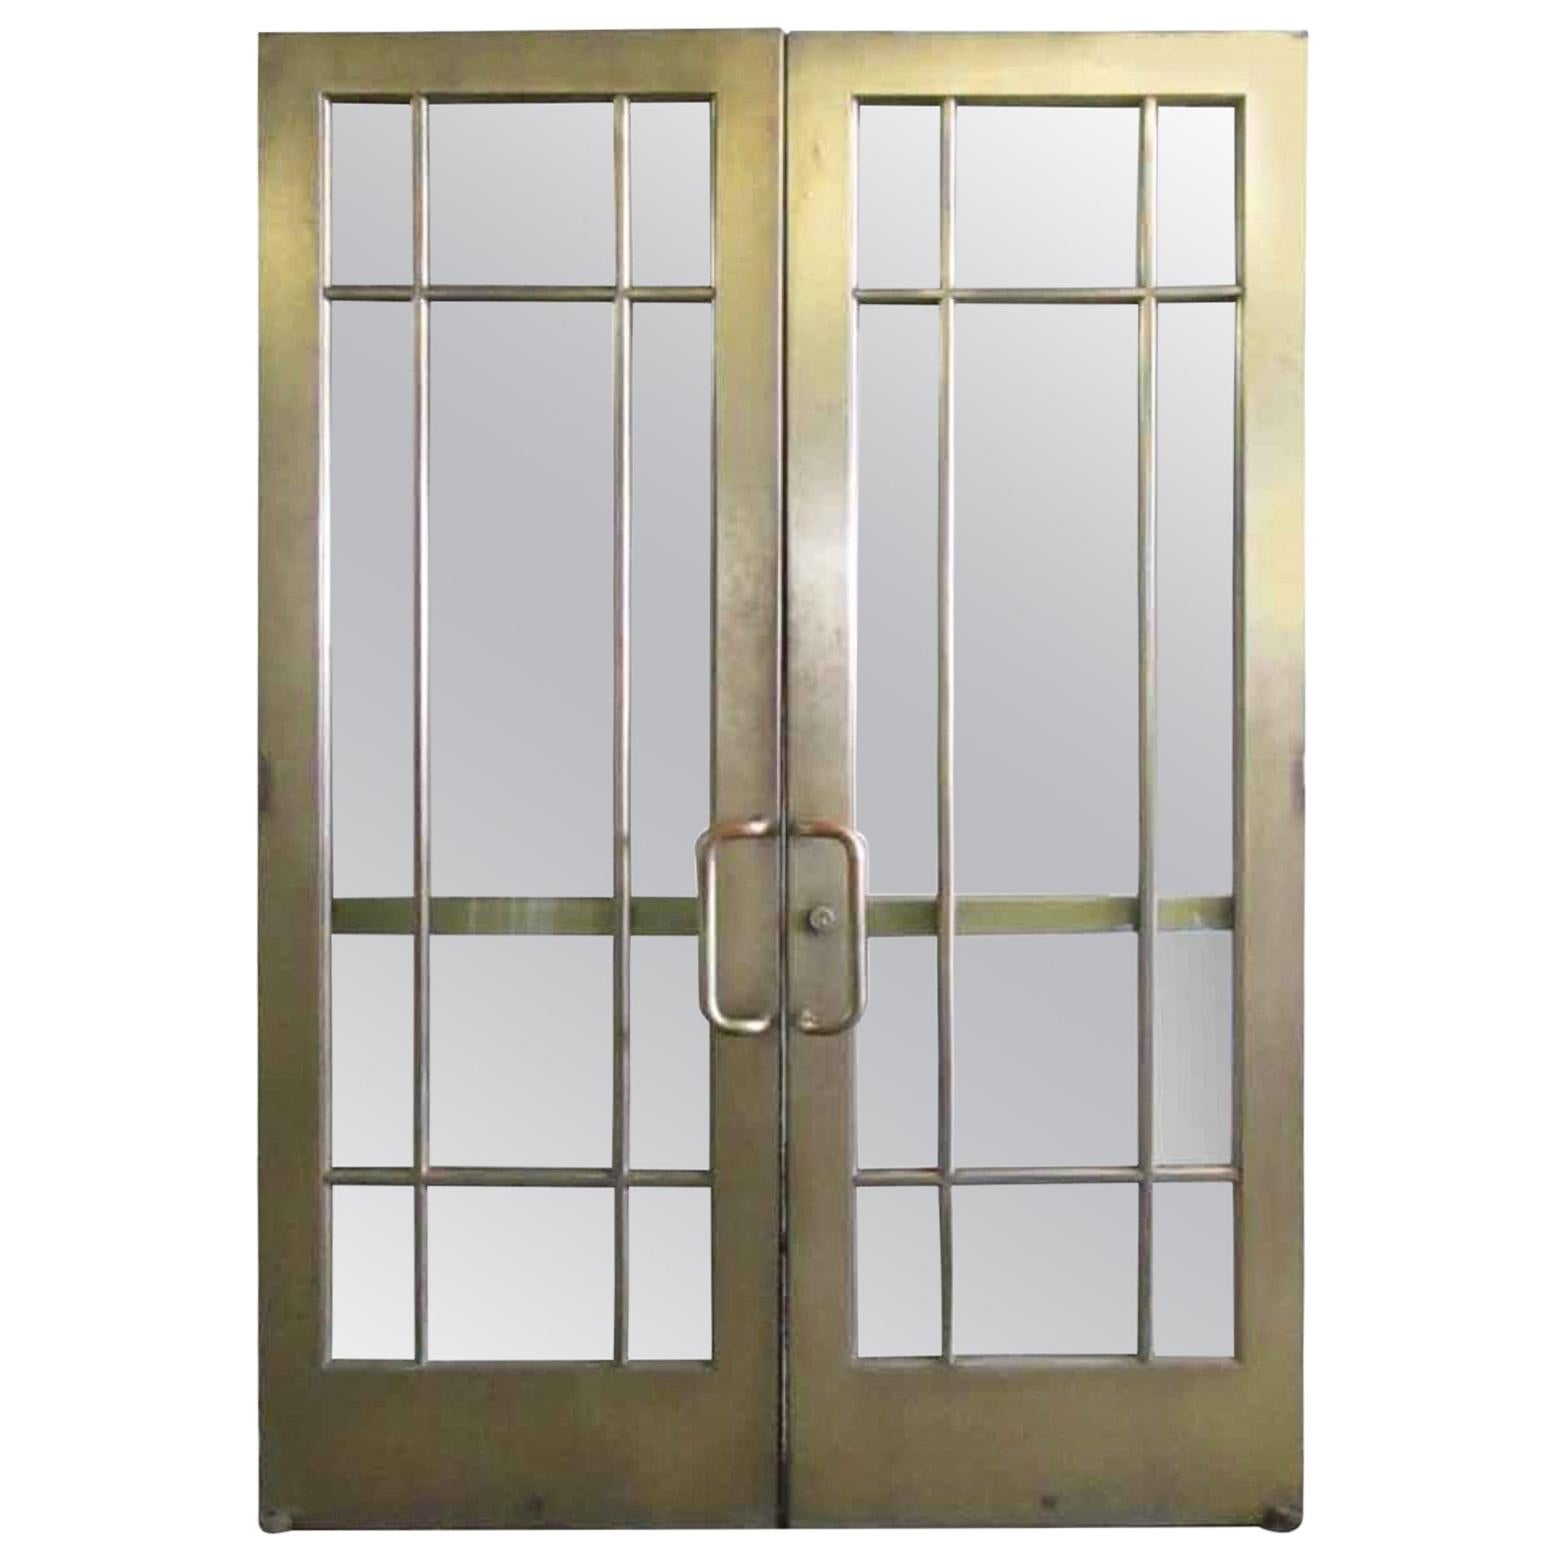 1920s Pair of Antique Brass Entryway French Doors with 9 Lites Each